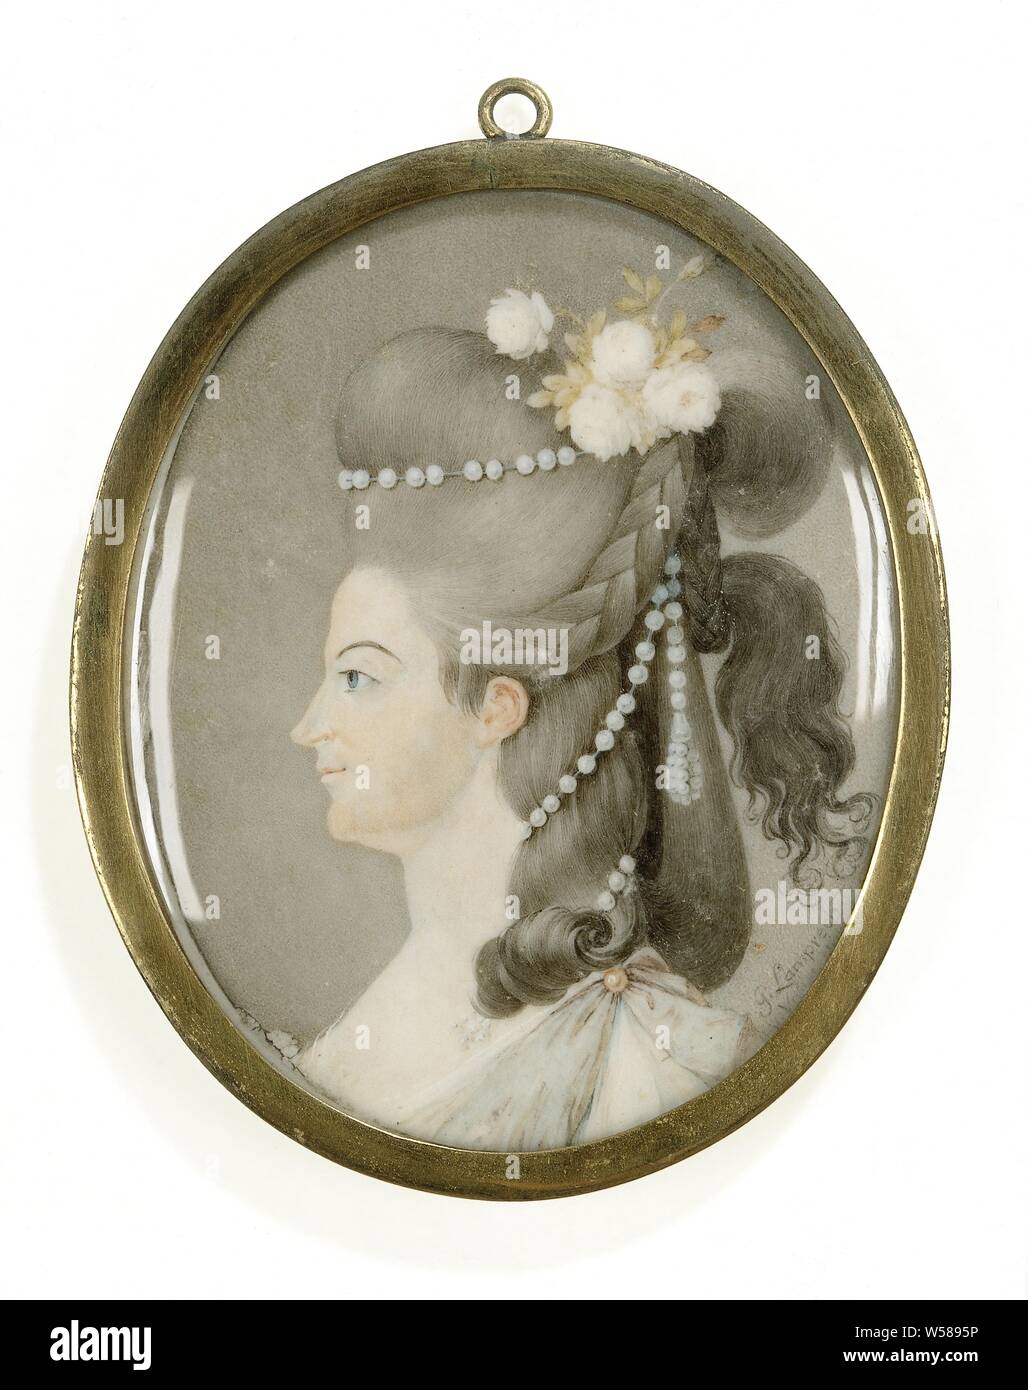 Frederika Sophia Wilhelmina (1751-1820), princess of Prussia. Wife of Prince Willem V, Portrait of Frederika Sophia Wilhelmina (1751-1820), Princess of Prussia. Wife of Prince Willem V. Buste, in profile to the left. Pearl cords and flowers in the hair. Part of the collection of portrait miniatures, Wilhelmina van Prussia (1751-1820), Georg Lamprecht, 7-Aug-1780, ivory, metal, glass, h 7.7 cm × w 6.2 cm h 8.2 cm × w 6.5 cm × d 0.9 cm Stock Photo